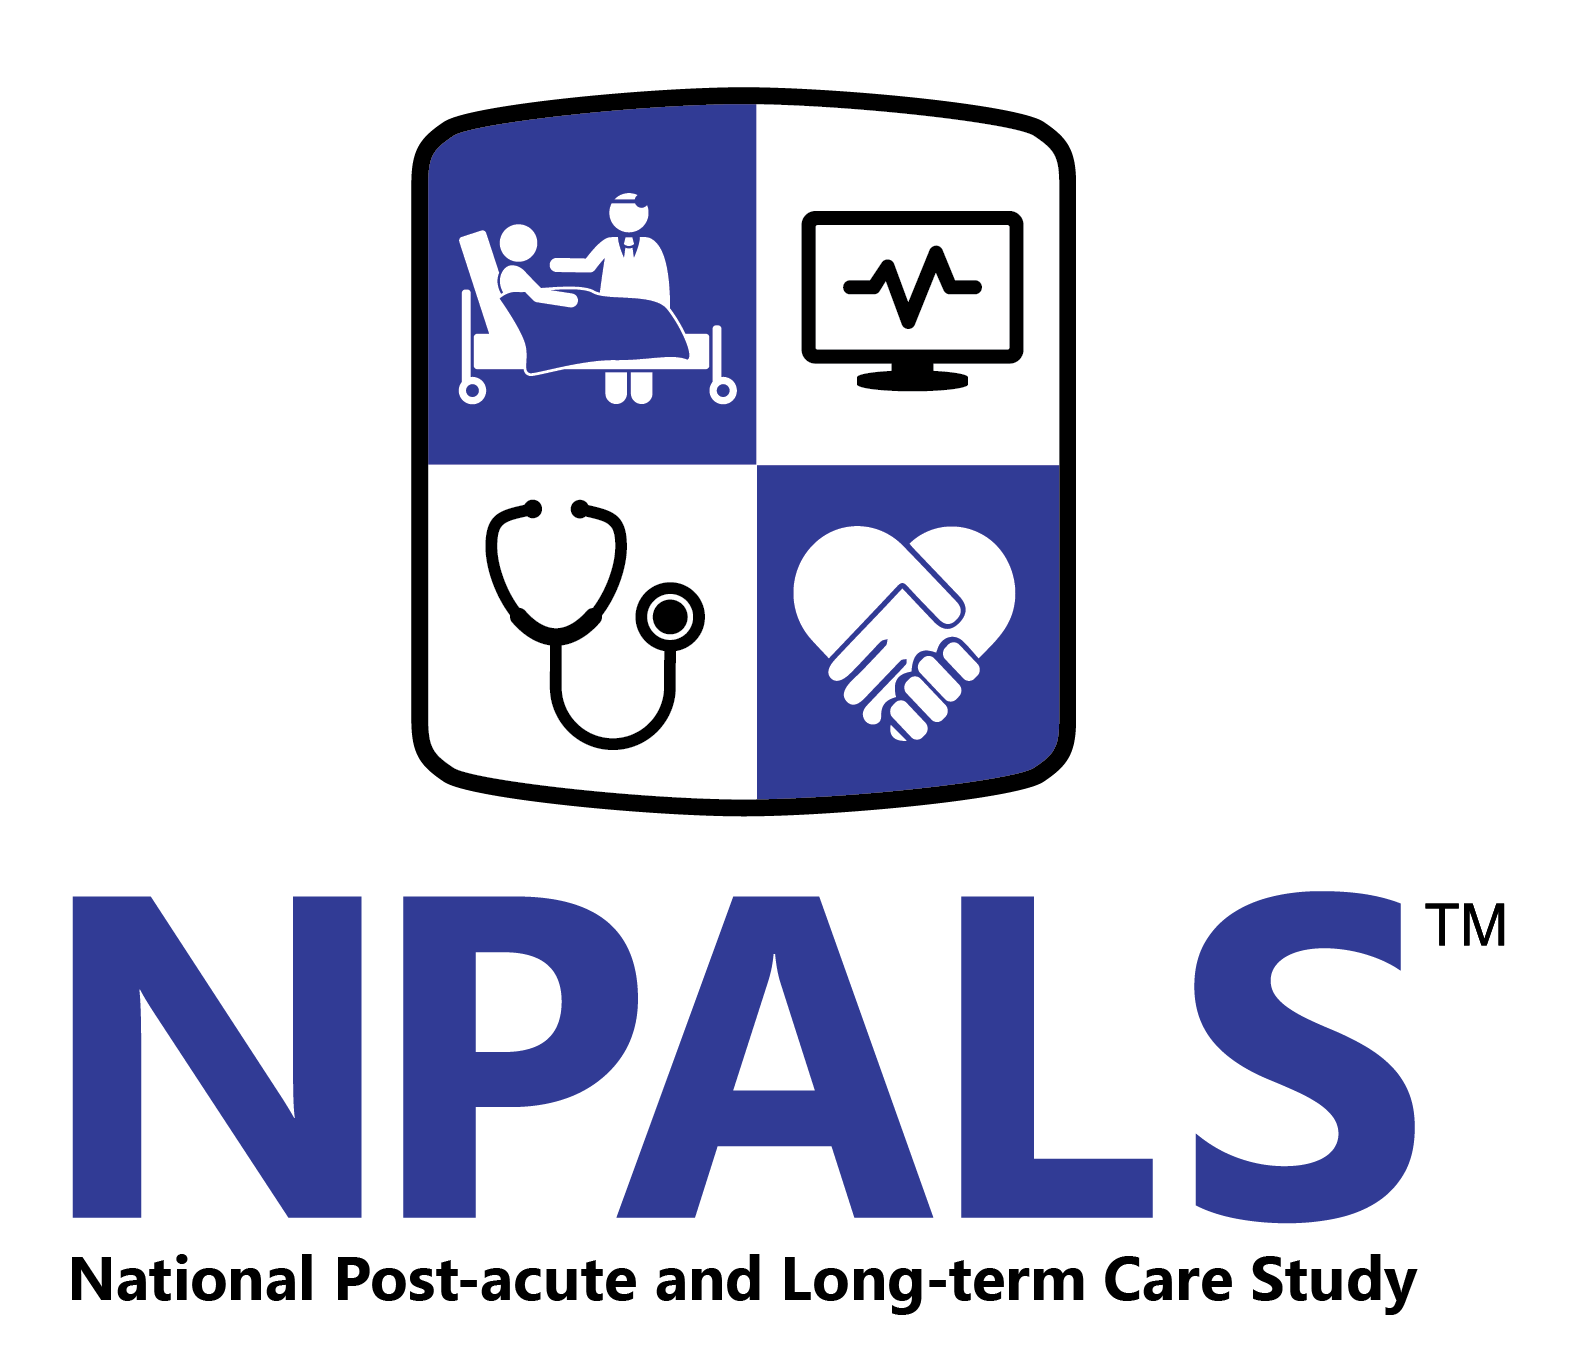 The logo for NPALS